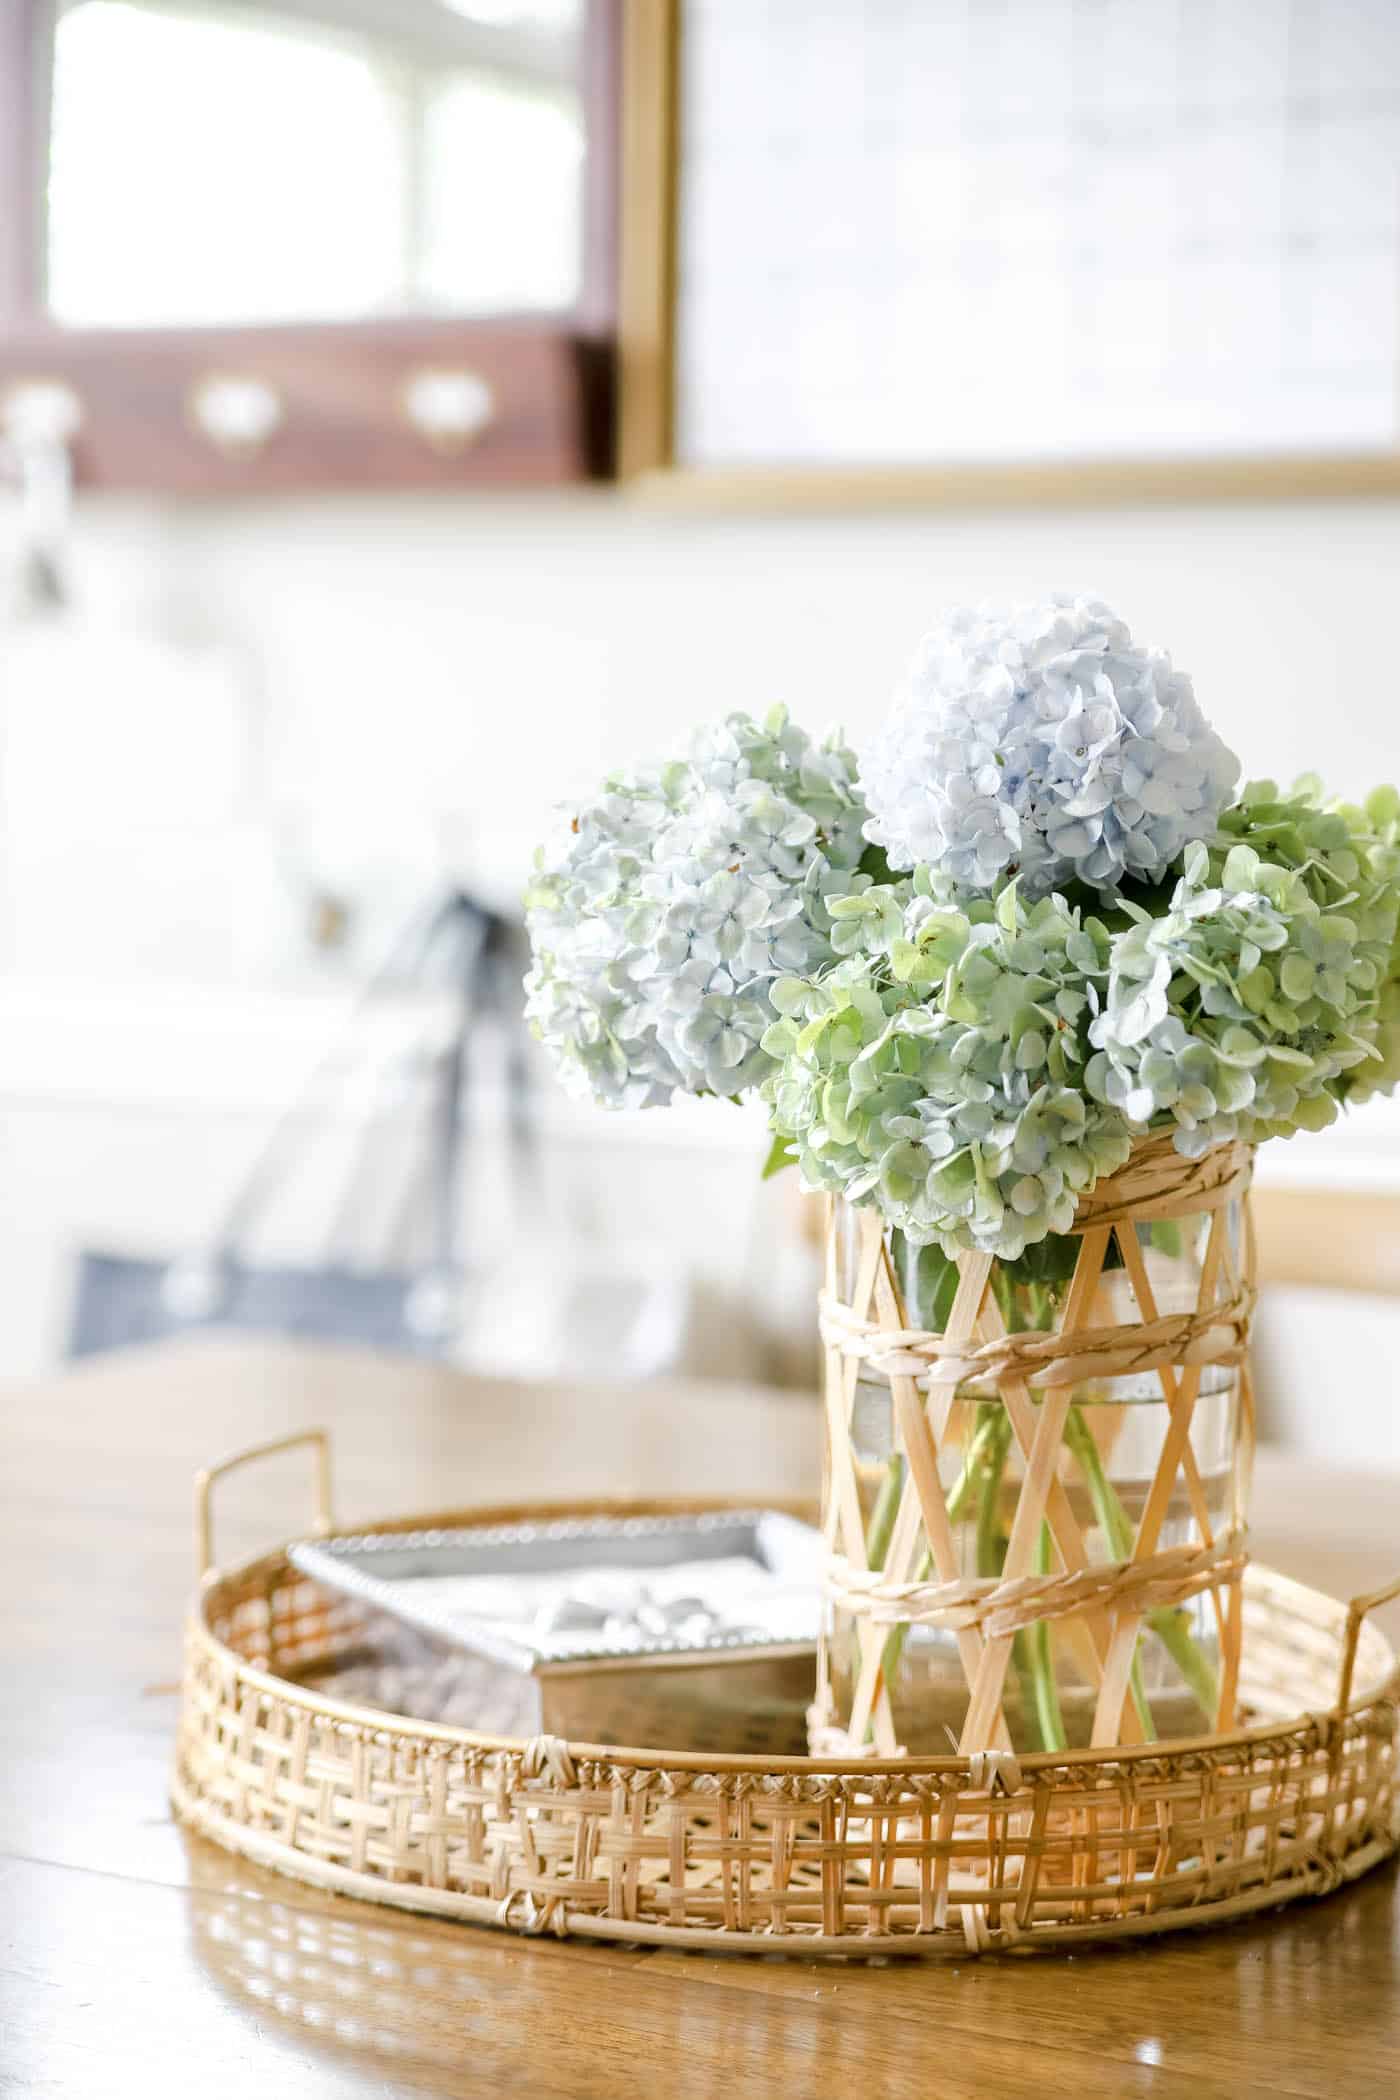 Woven Tray and Vase filled with Hydrangeas